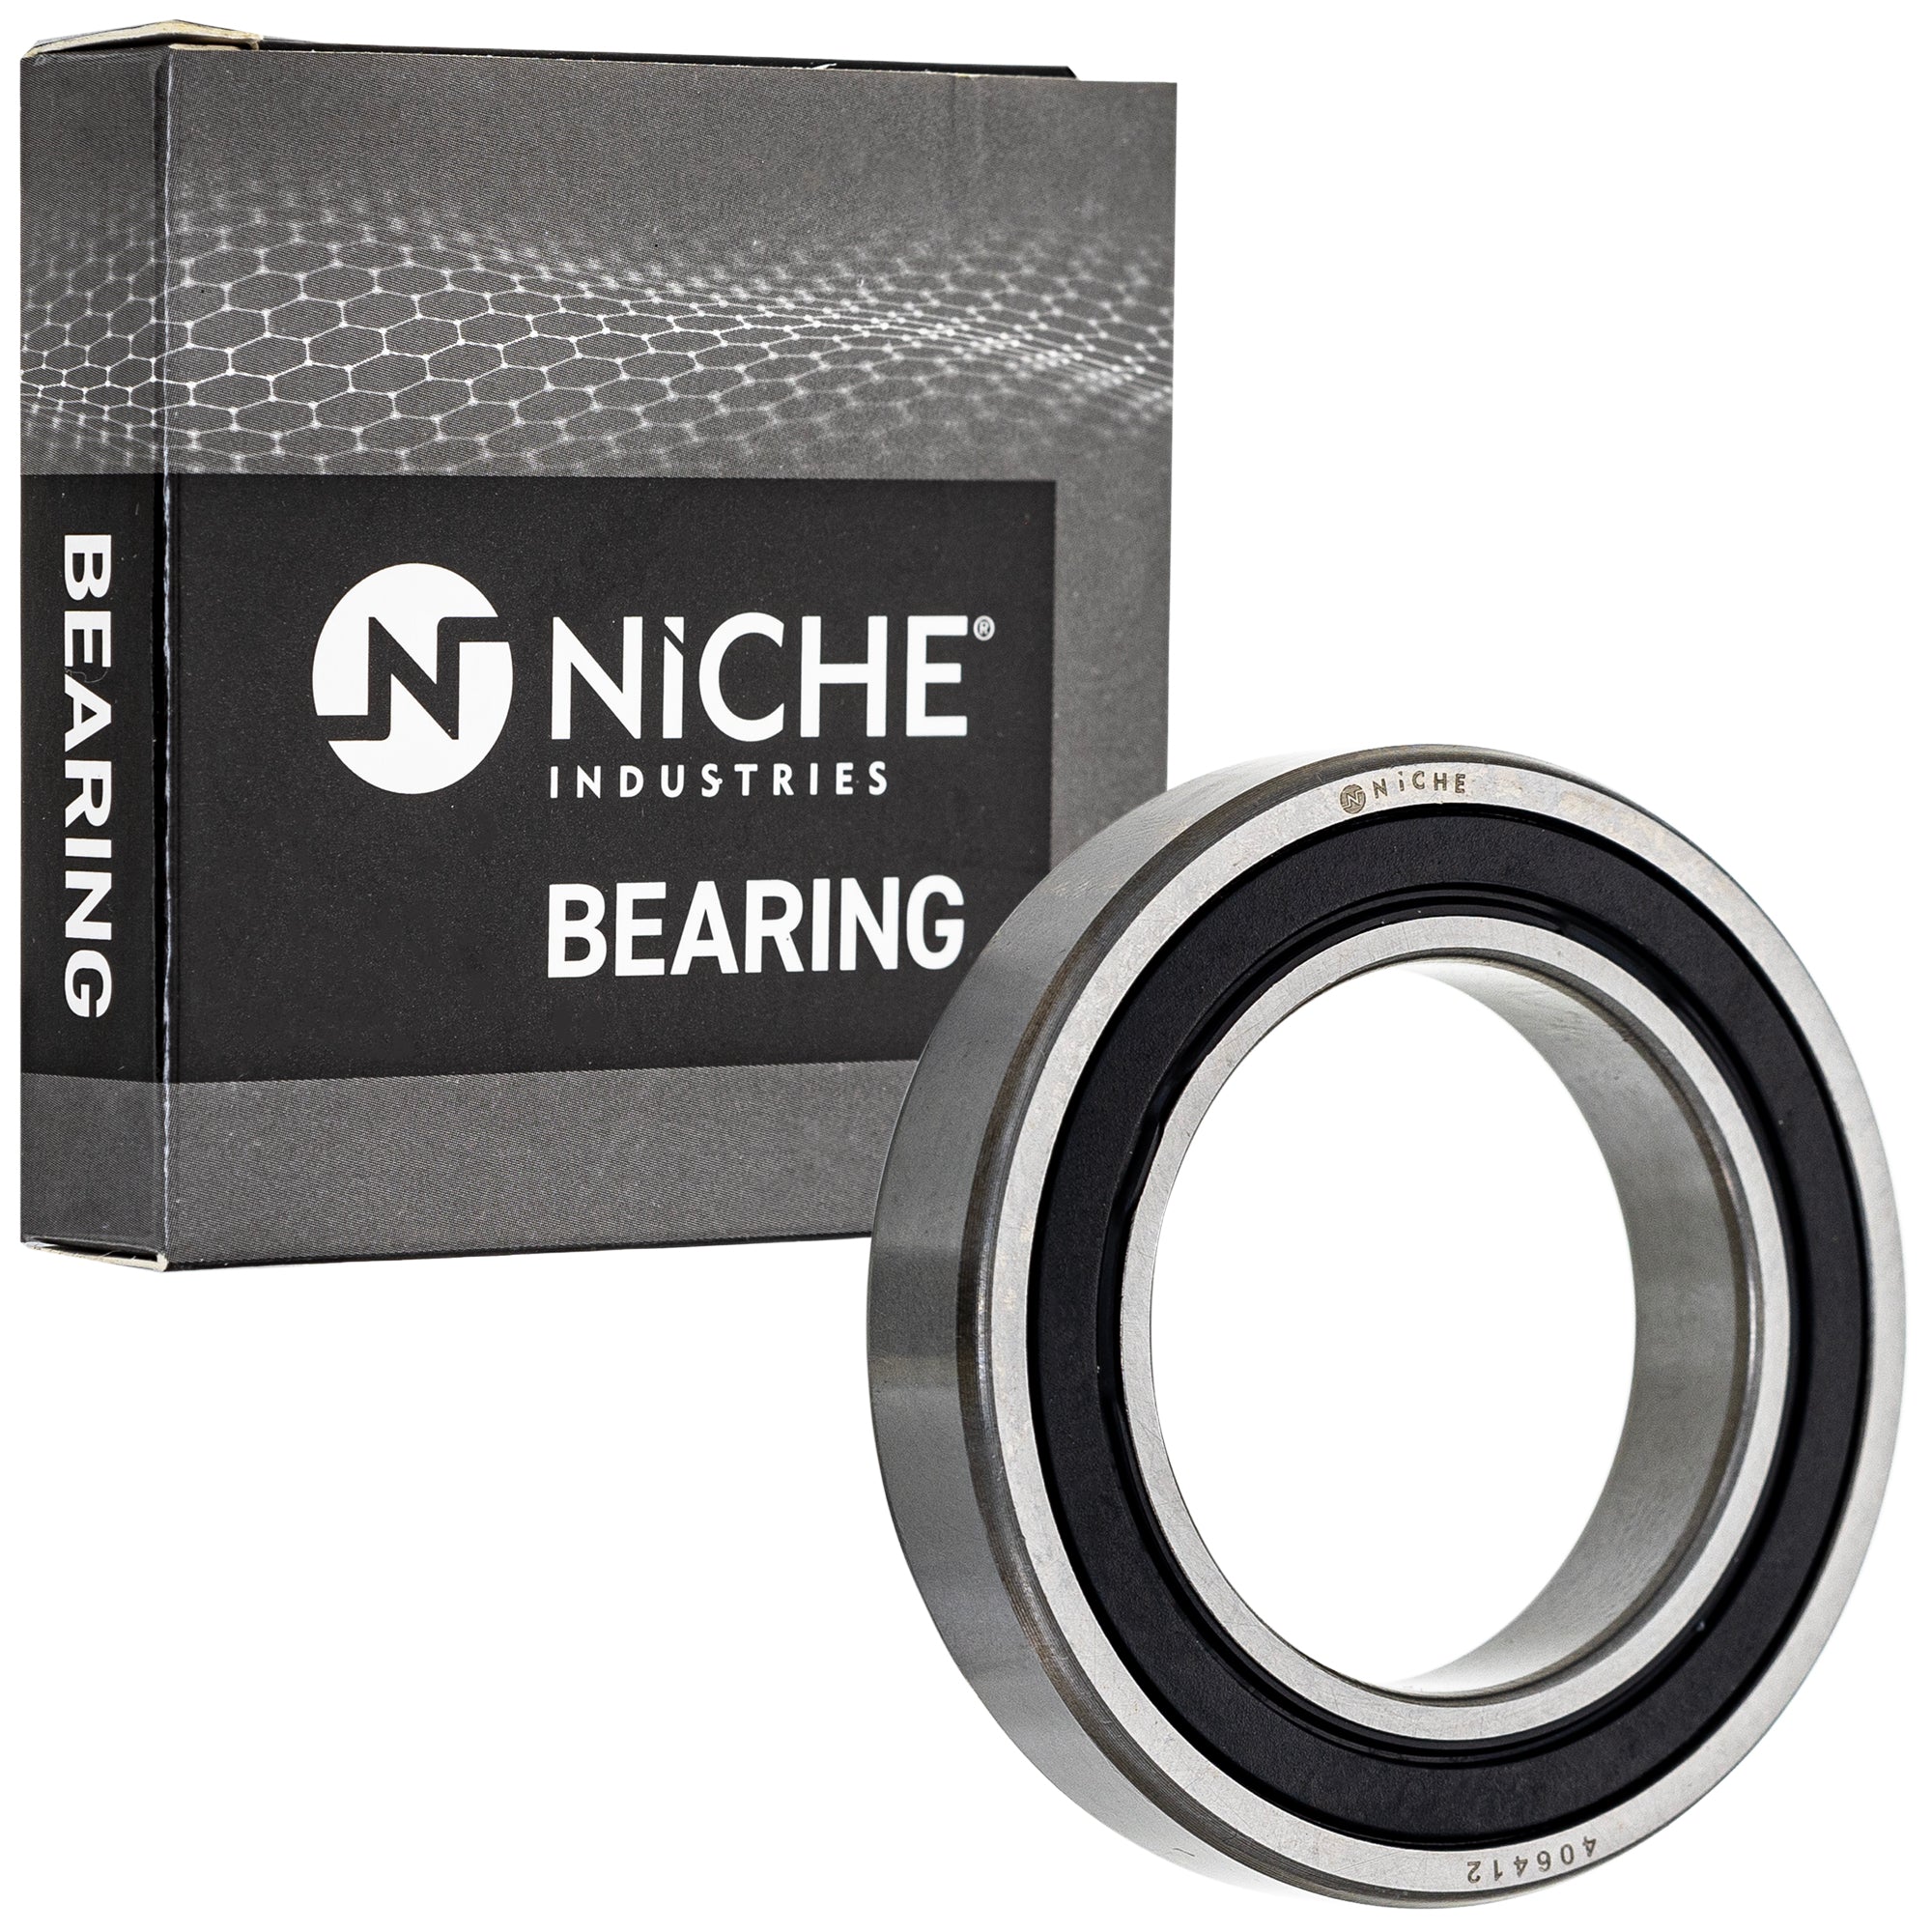 NICHE 519-CBB2262R Bearing 2-Pack for zOTHER YFZ450 Raptor